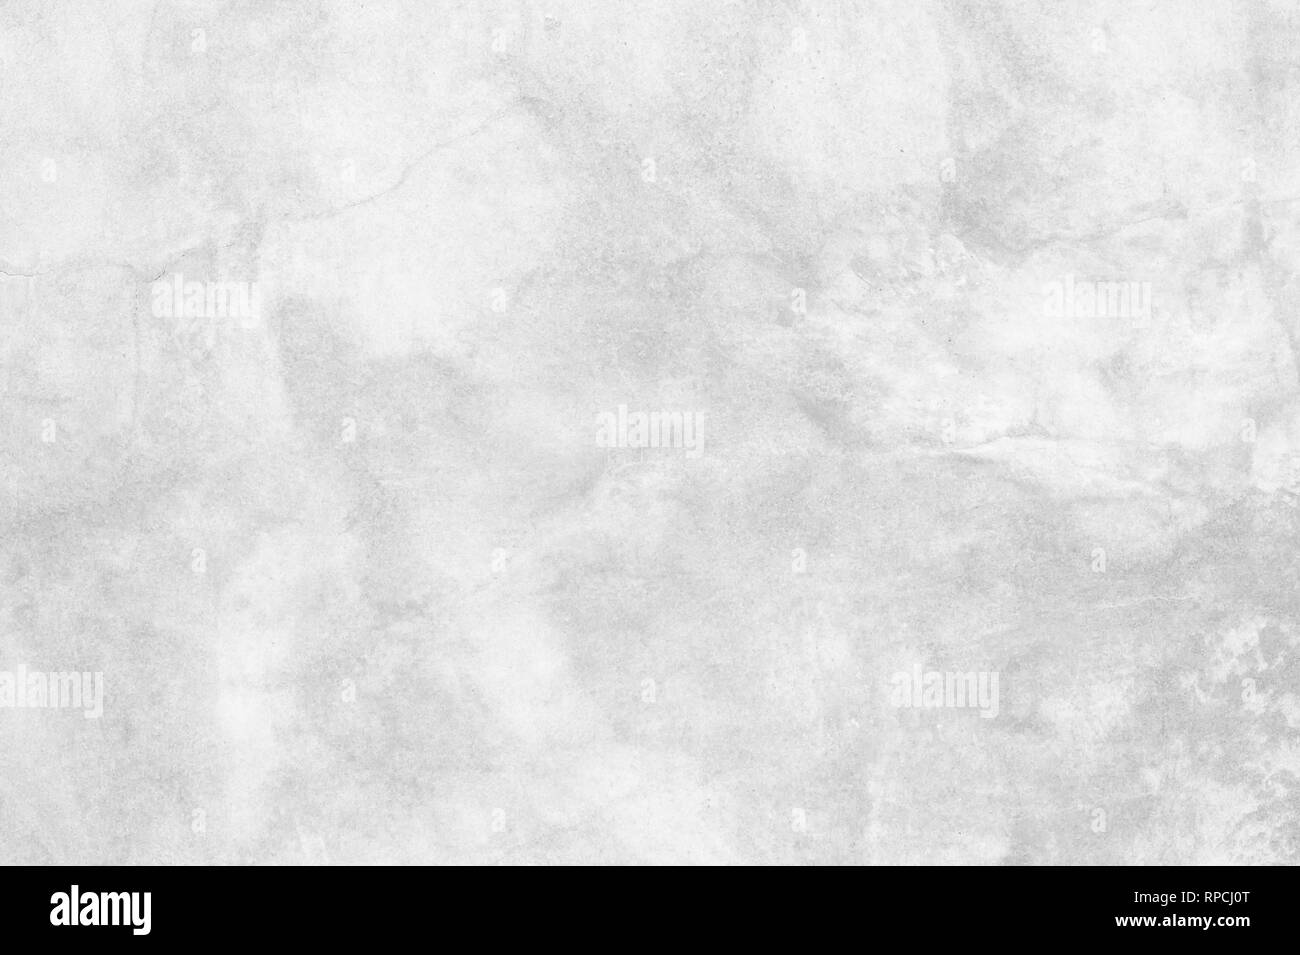 White concrete wall for interiors or outdoor exposed surface polished concrete. Cement have sand and stone of tone vintage, natural patterns old antiq Stock Photo